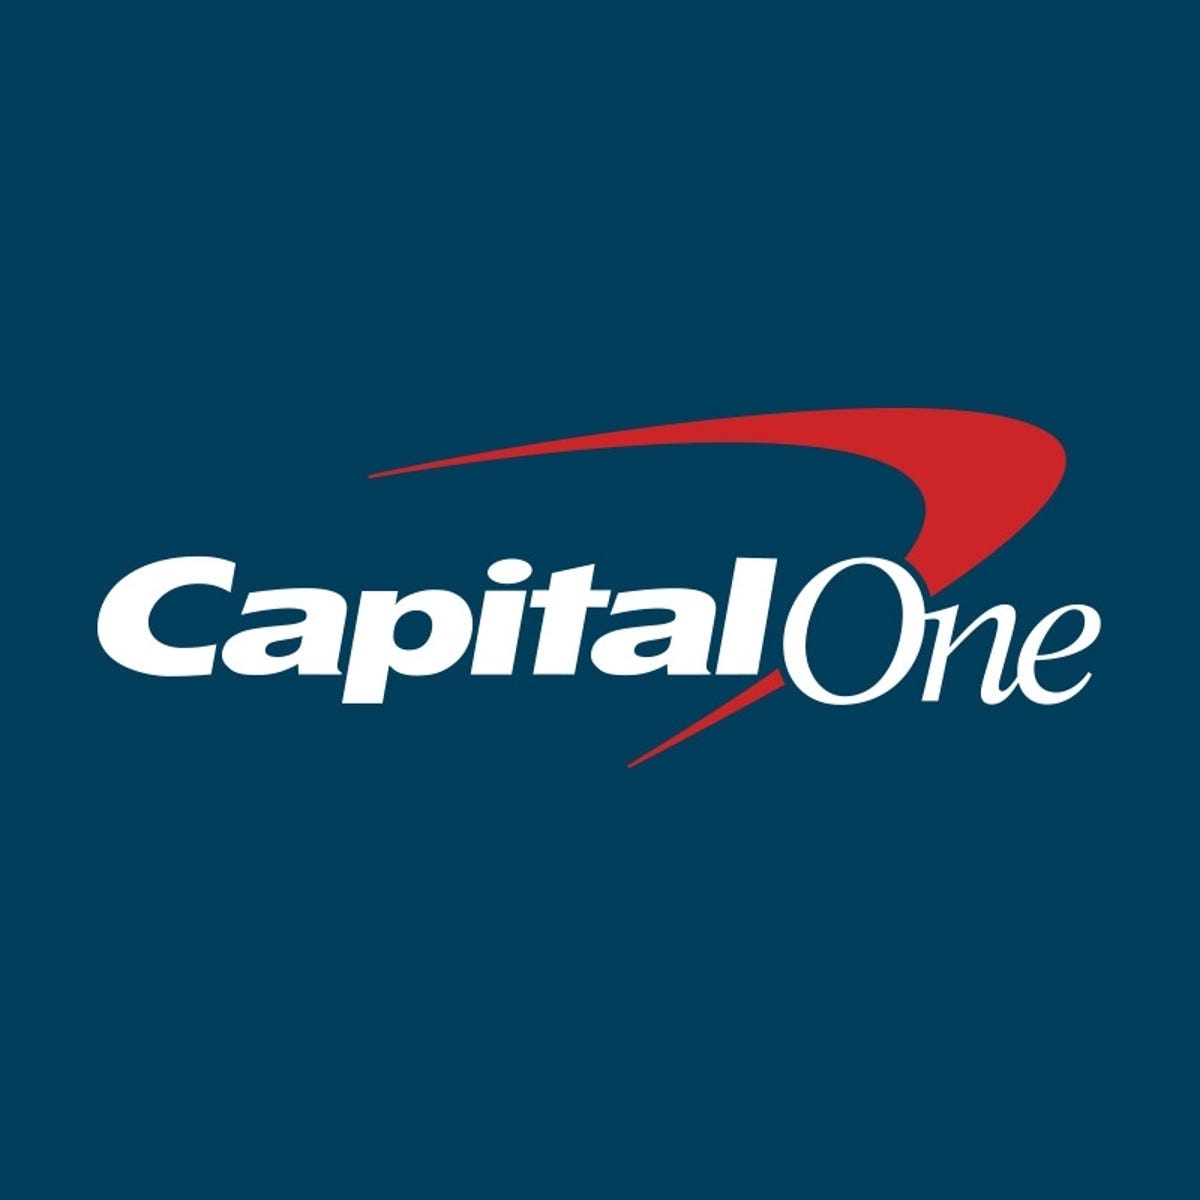 "Capital One" in white italic font laid over the signature red boomerang on a blue background.